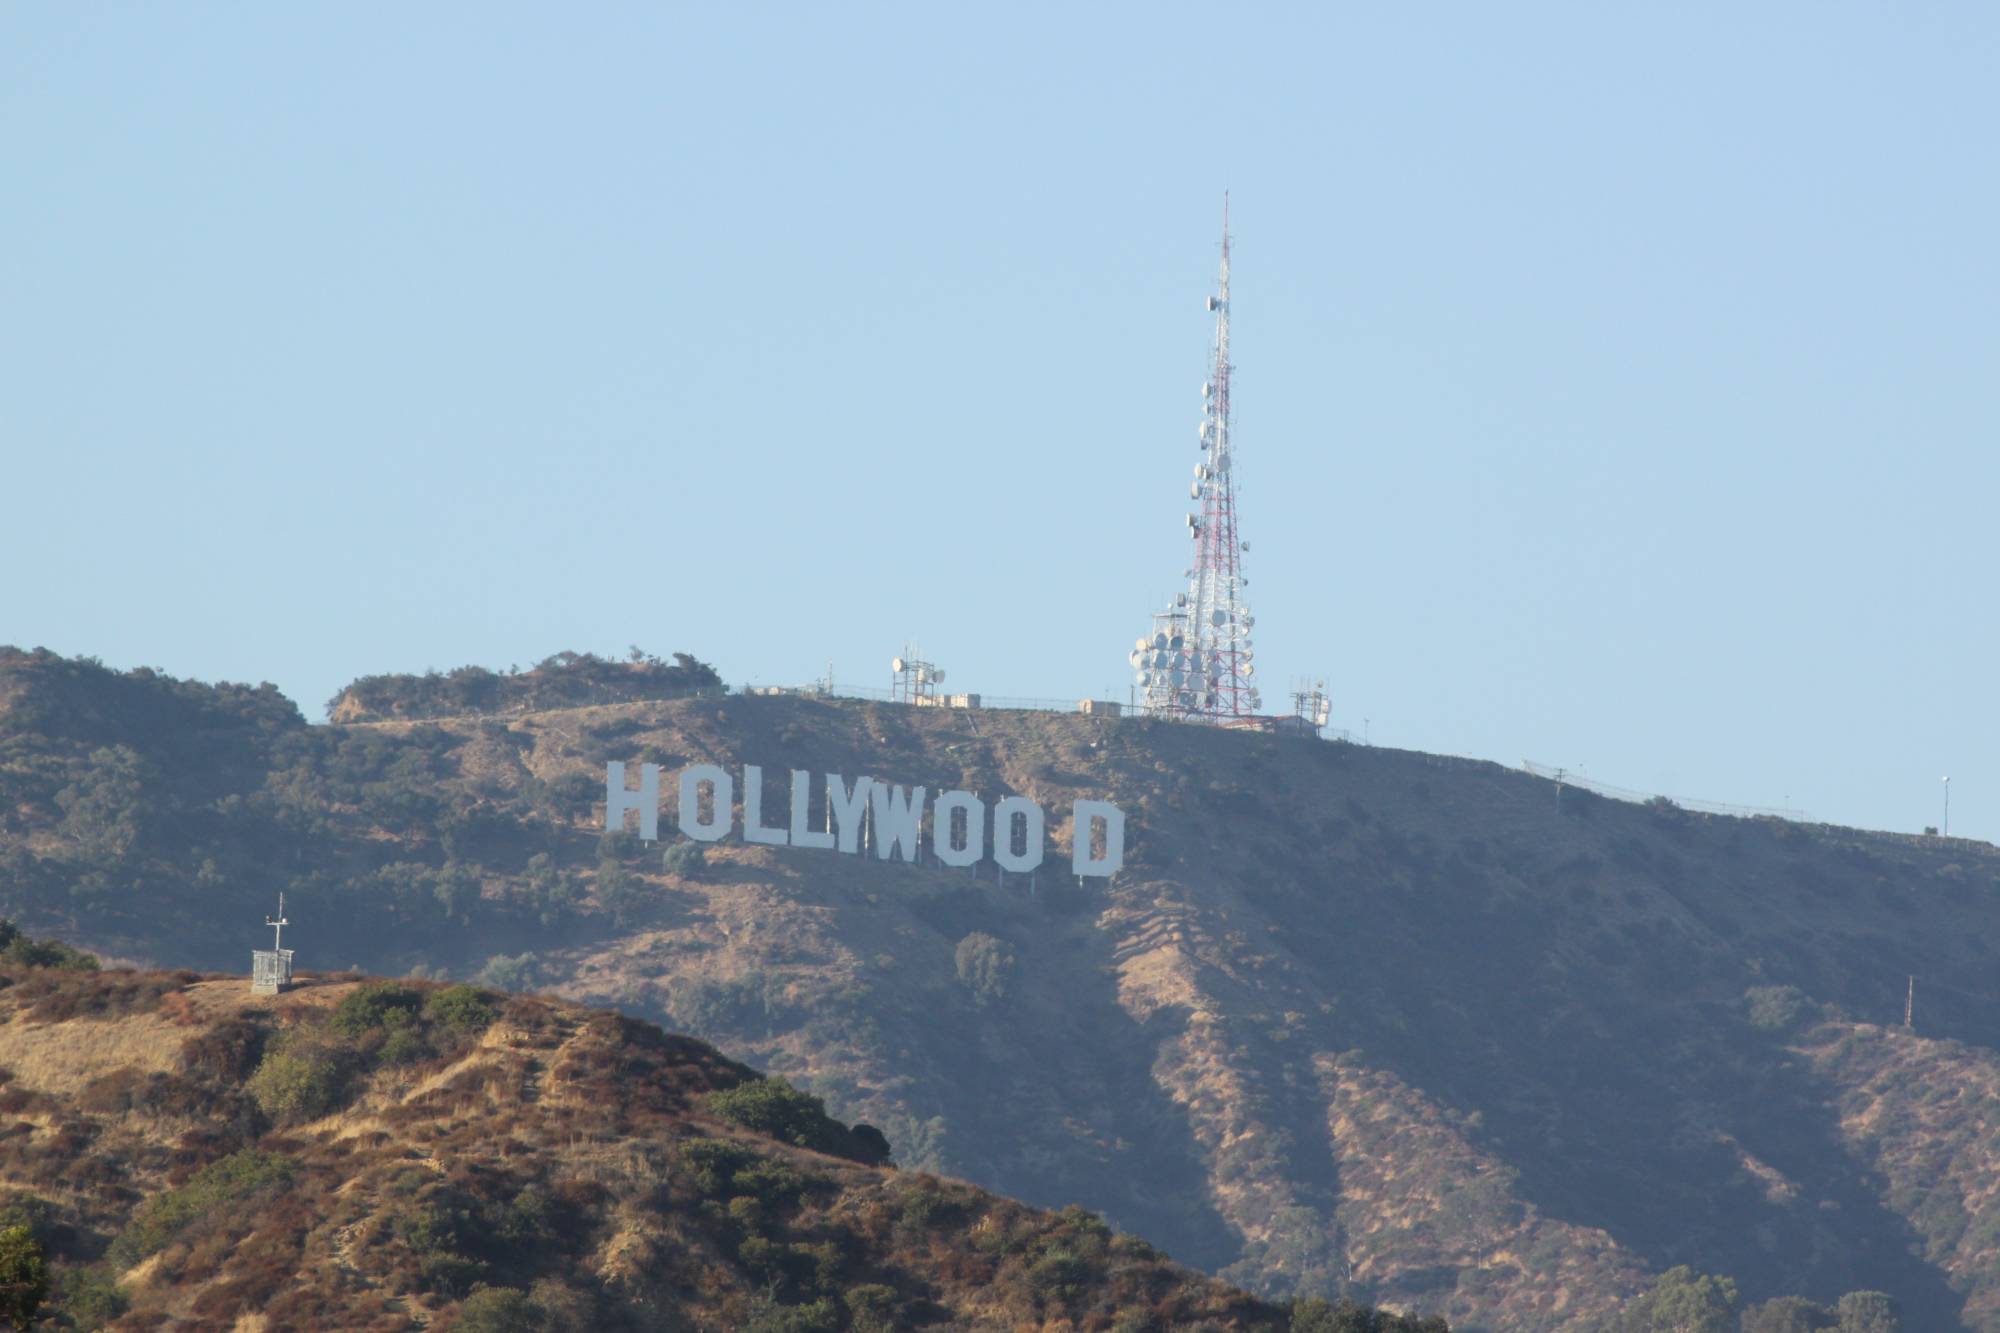 Hollywood sign - taken from the Hollywood and Highland Center